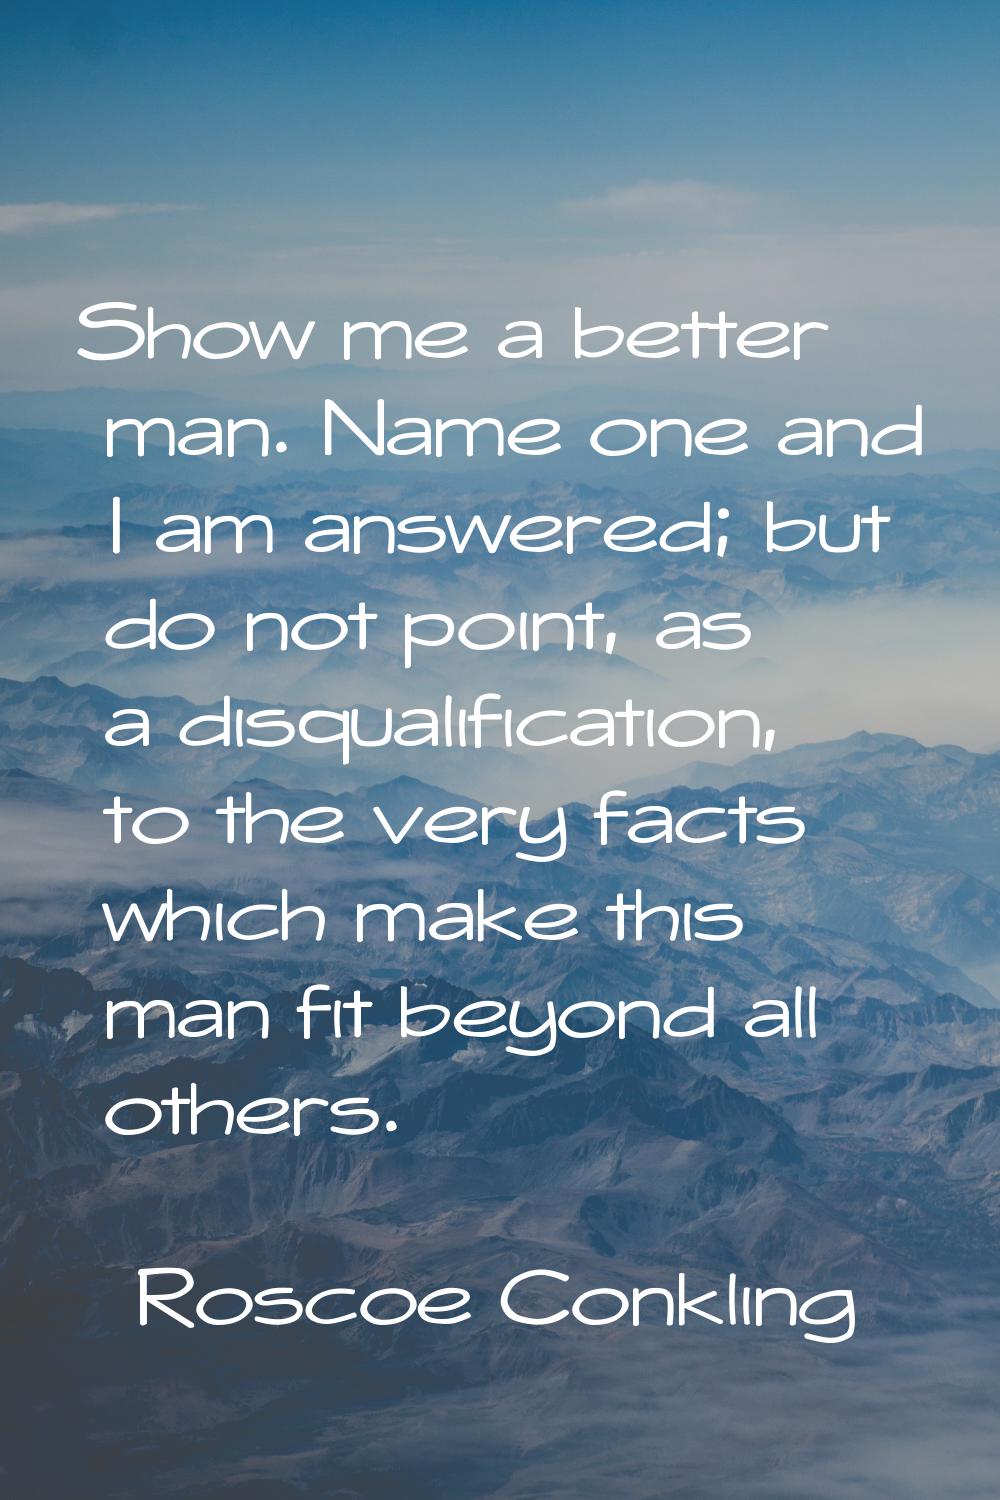 Show me a better man. Name one and I am answered; but do not point, as a disqualification, to the v